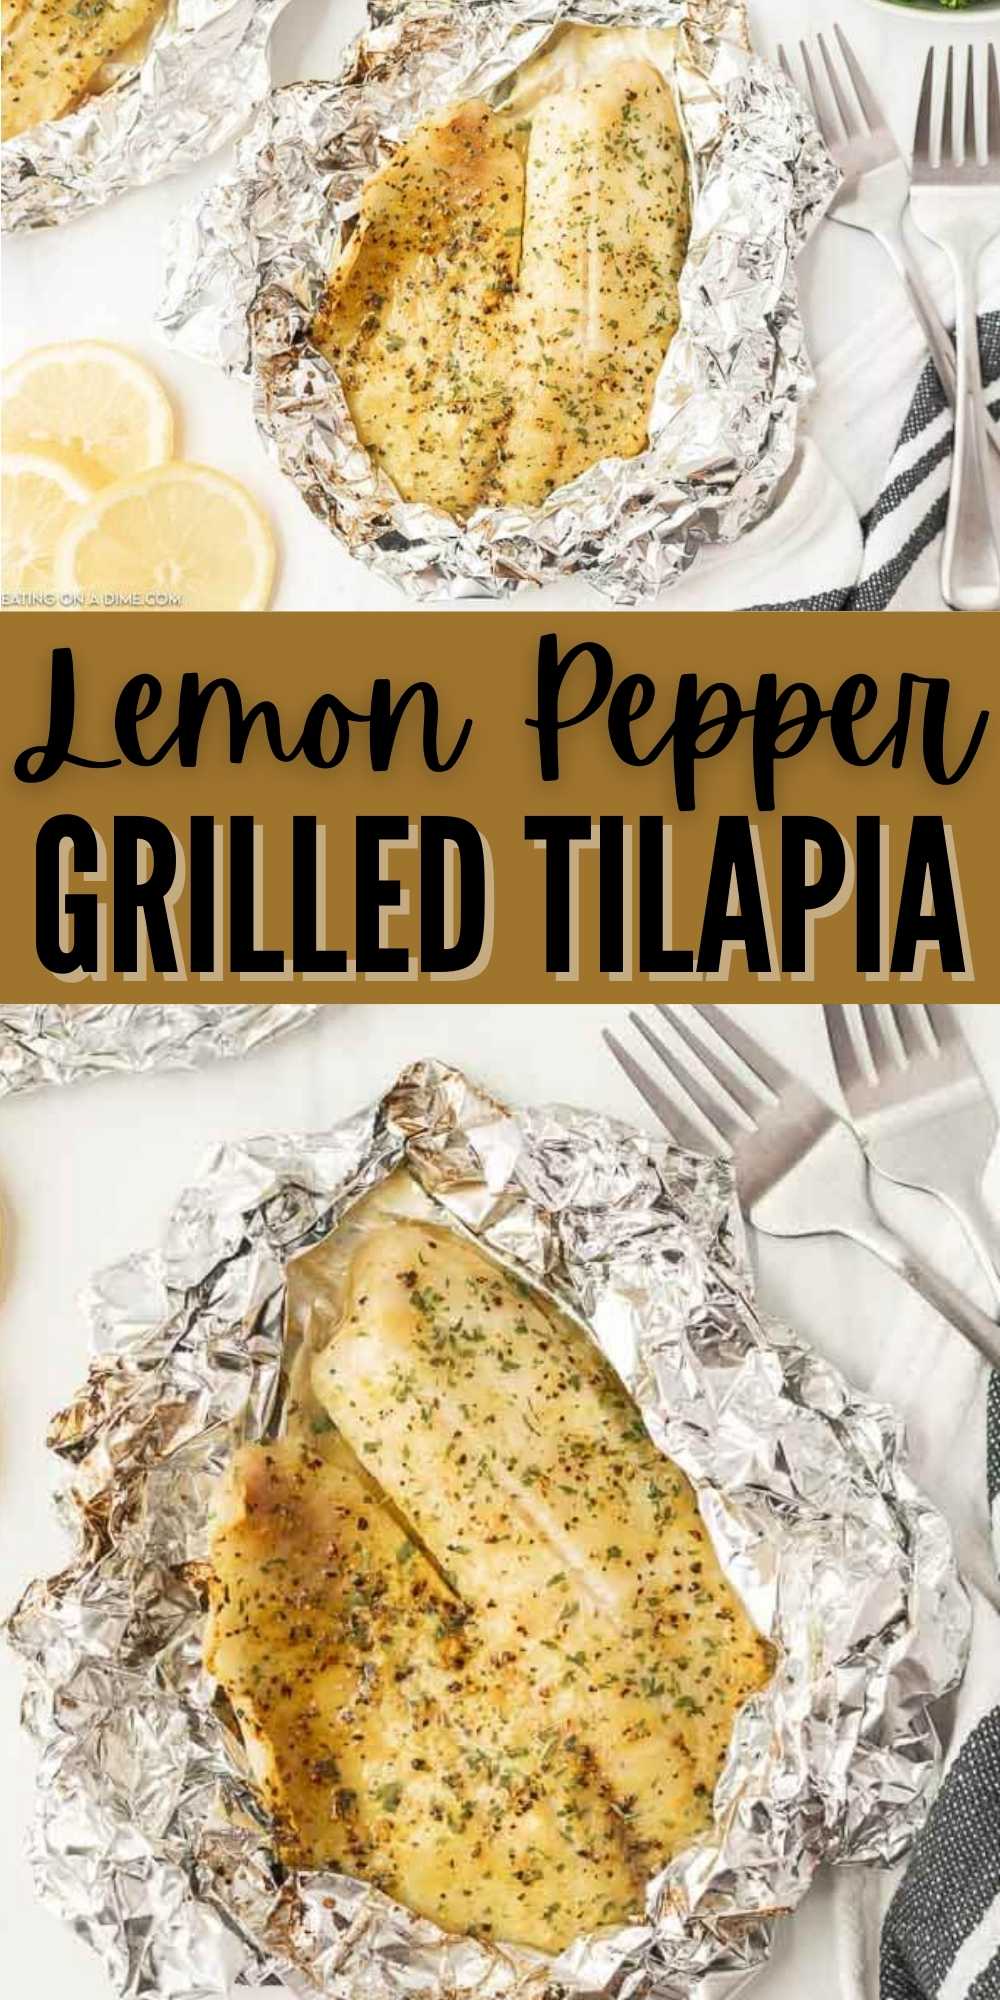 This Lemon Pepper Grilled Tilapia recipe tastes amazing and is so easy to make! You can have dinner ready in just 10 minutes! You only need 3 ingredients to make this easy grilled tilapia recipe.  #eatingonadime #seafoodrecipes #grillingrecipes #tilapiarecipes 
